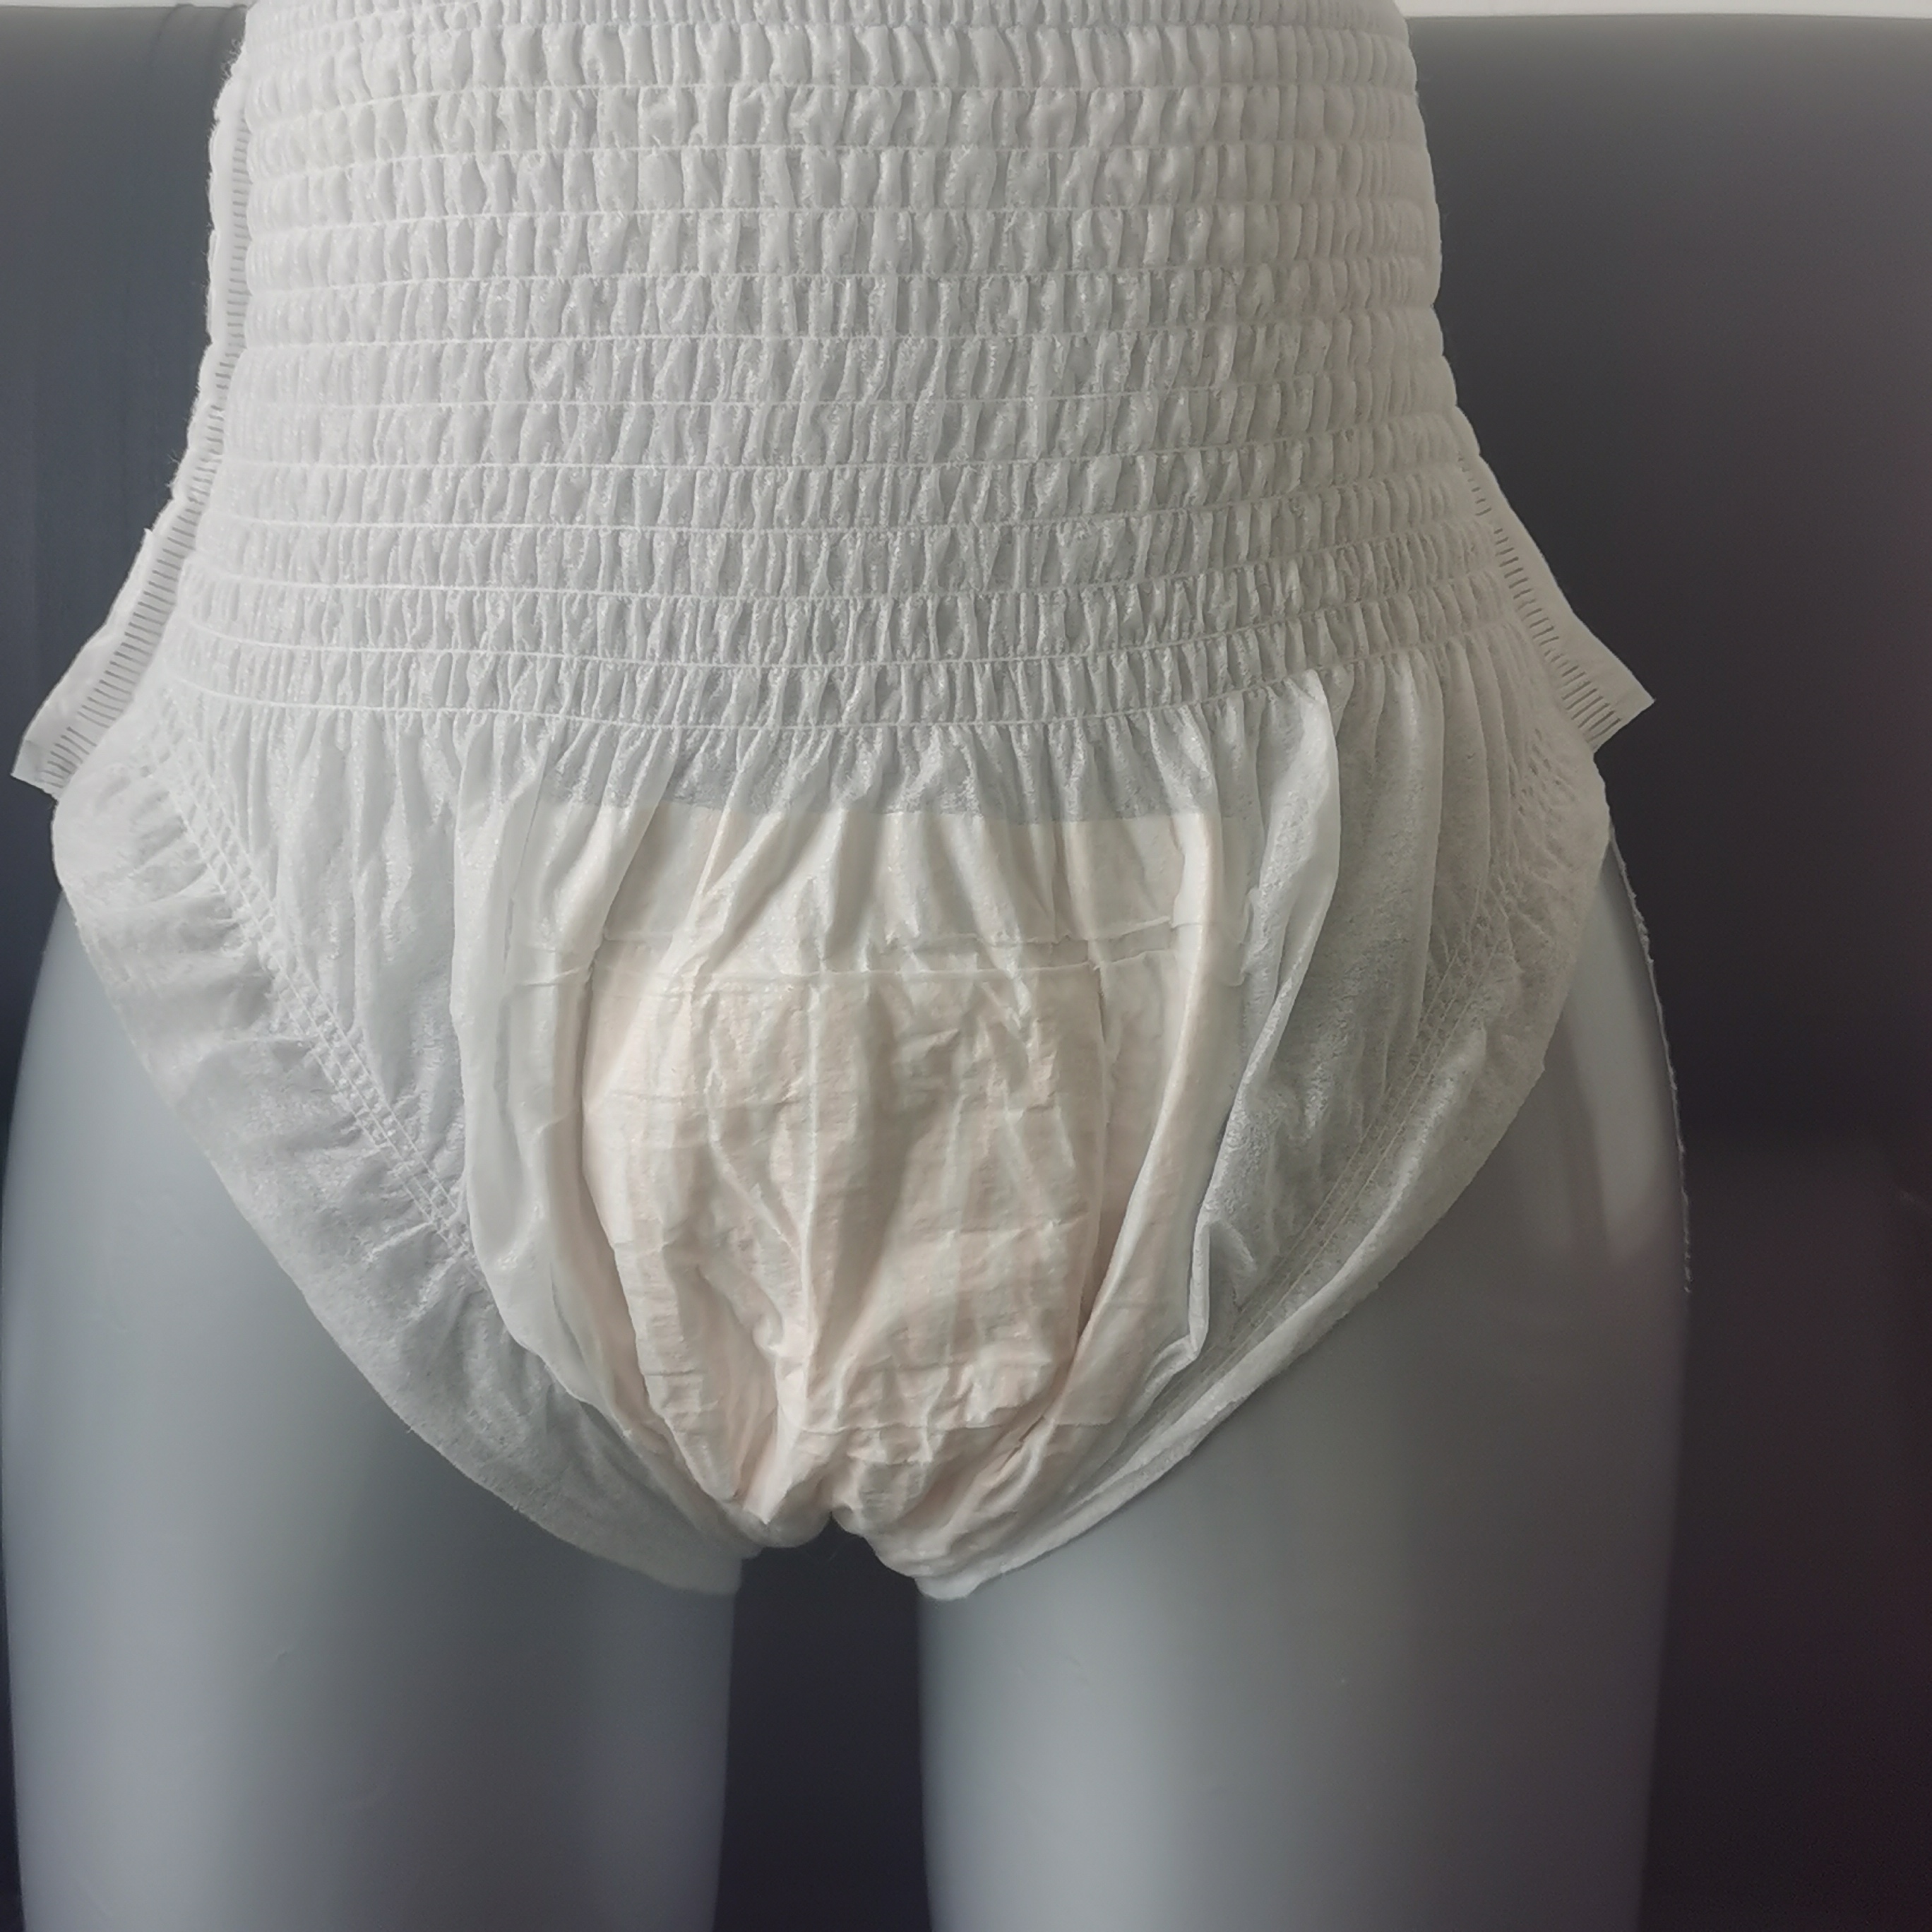 China Customized Unijoy Period Panties For Incontinence Suppliers,  Manufacturers - Factory Direct Wholesale - UNICARE